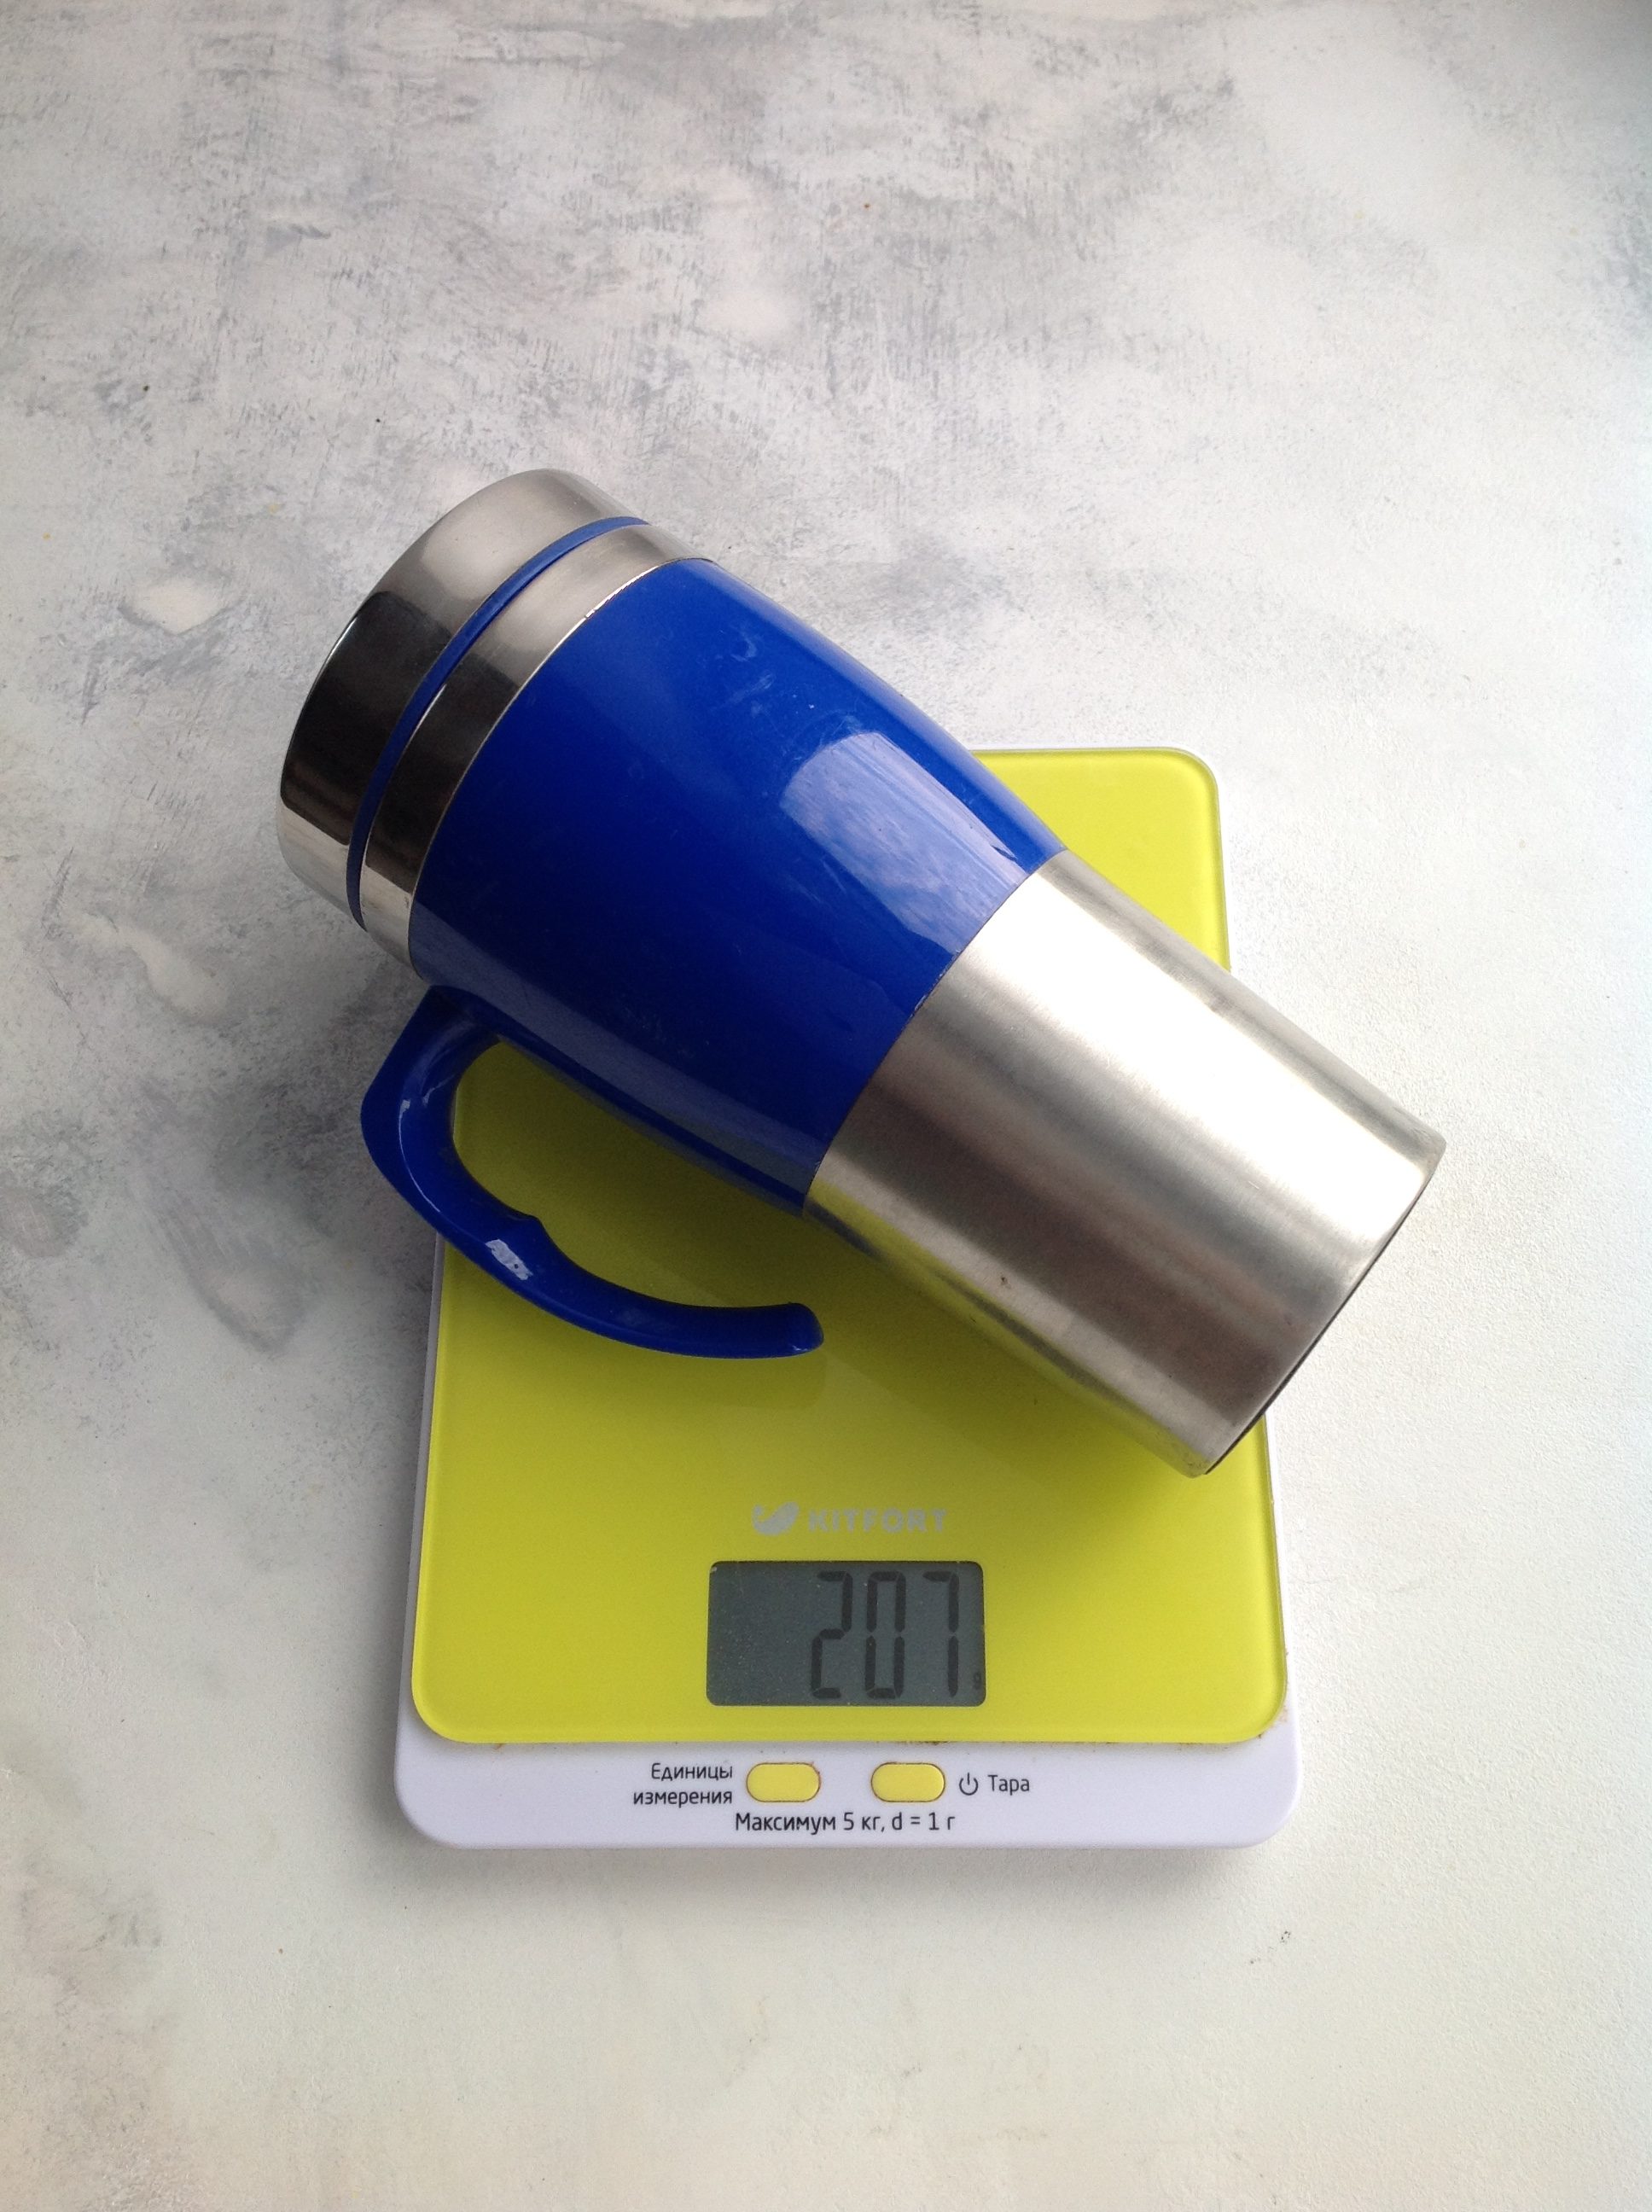 weight of the thermic cup with handle